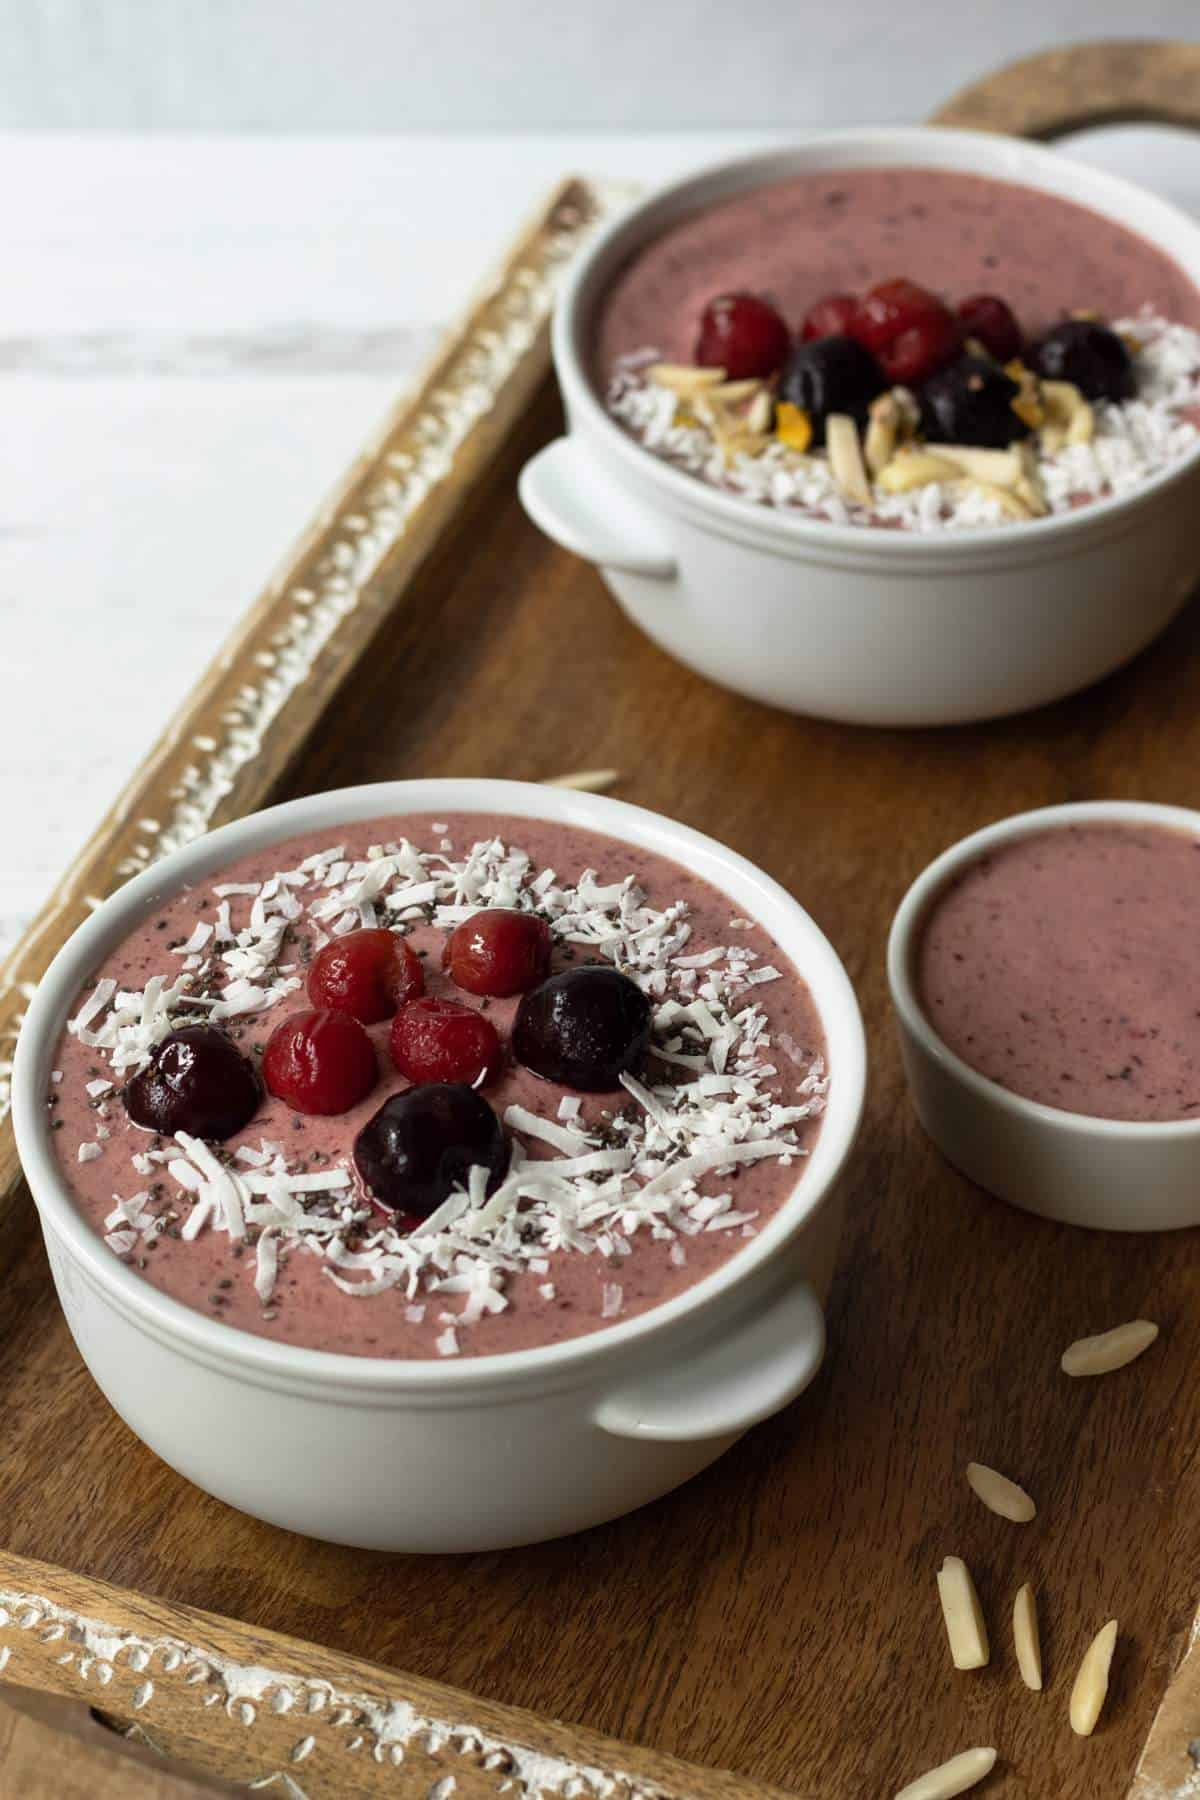 Cherry smoothie bowls in a serving tray.